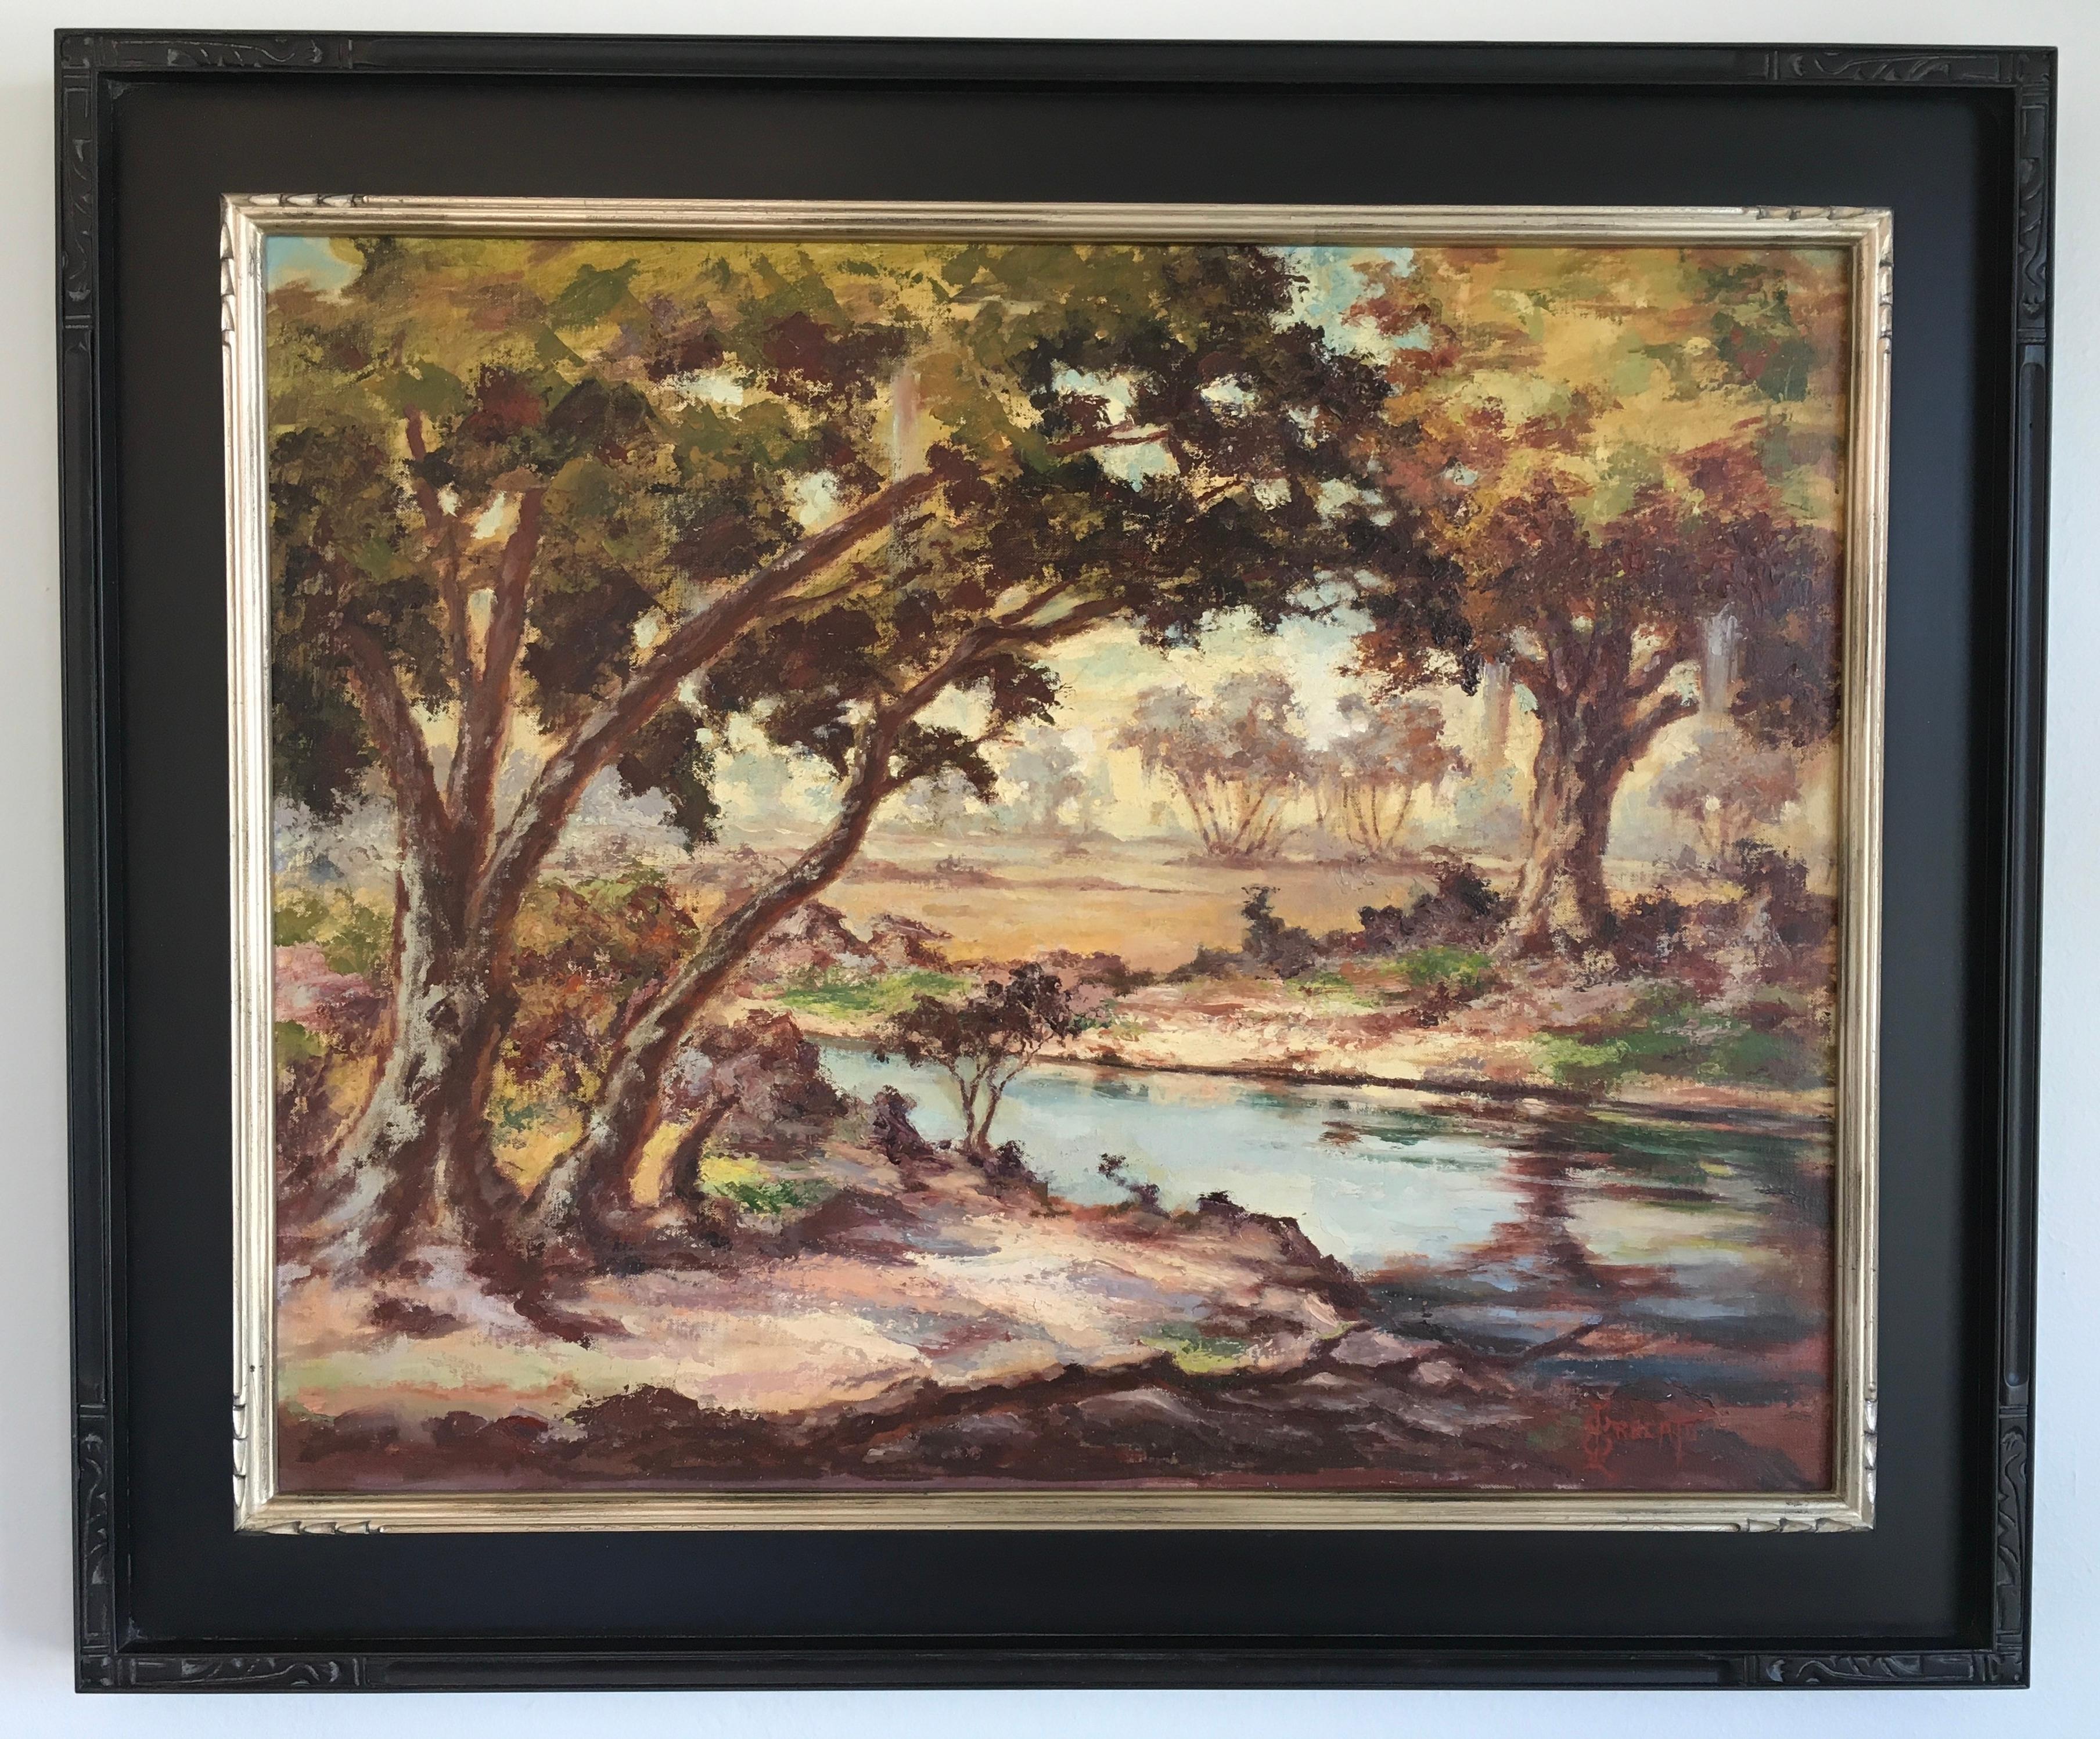 This 24" x 30" oil on board painting is of a summer landscape with trees and a meandering river in the center of the scene. The artist is unknown, however, there is a signature in the bottom right corner. The style is similar to that of